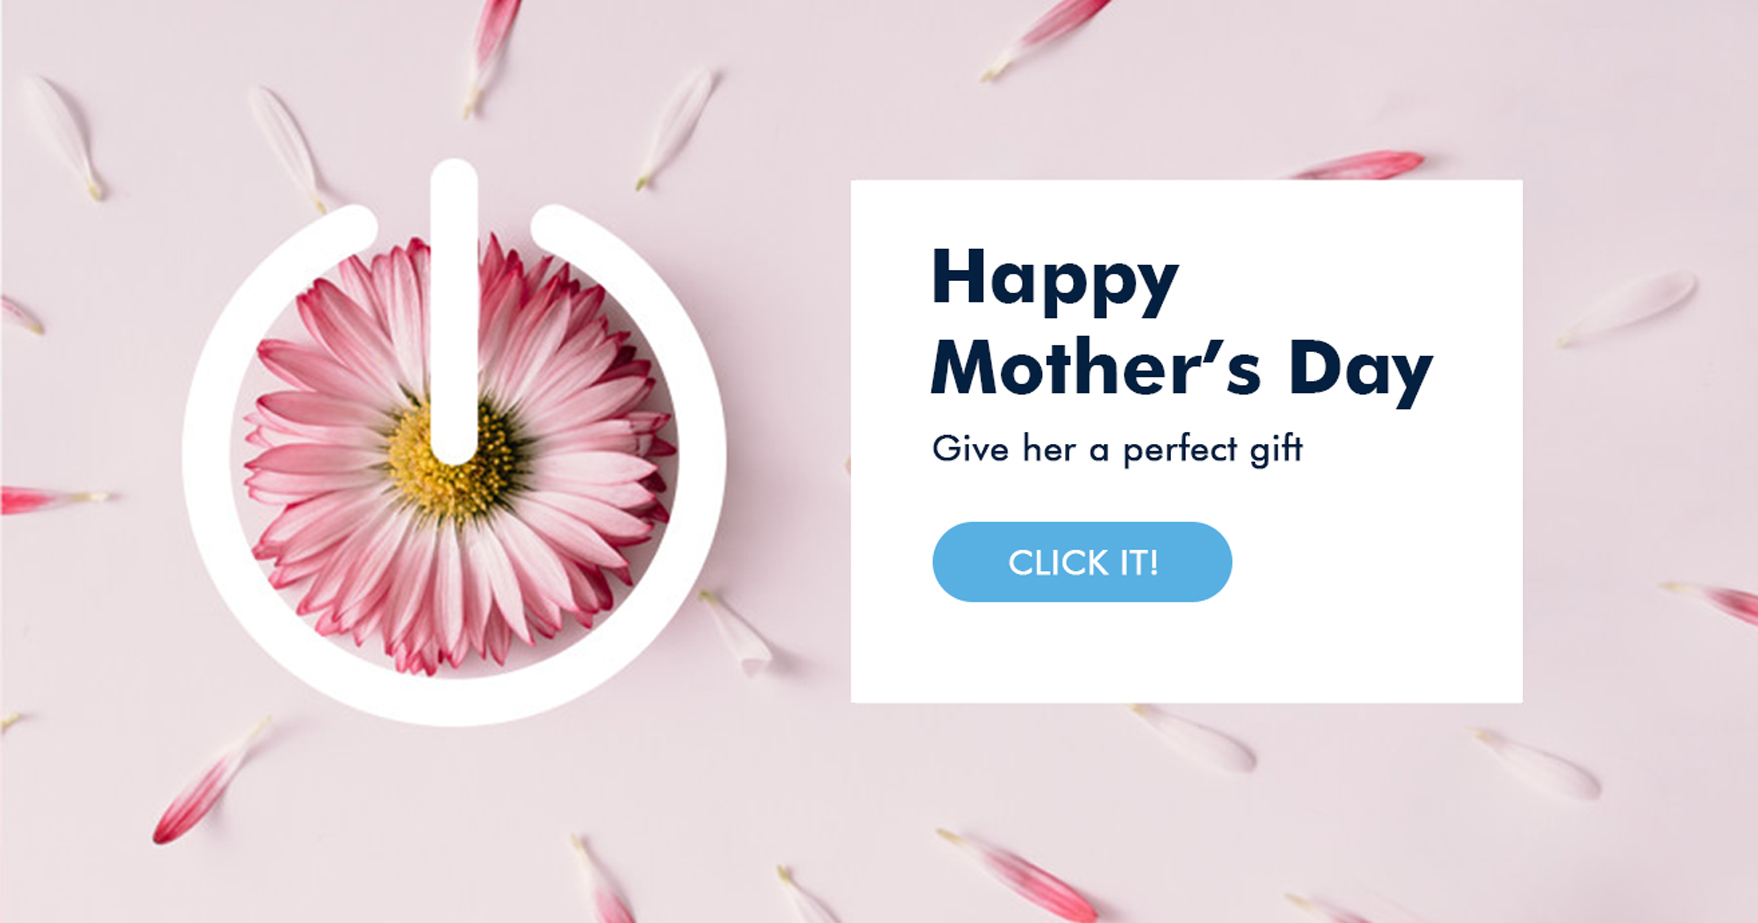 Give her a perfect gift this Mother’s Day! | De’Longhi Philippines